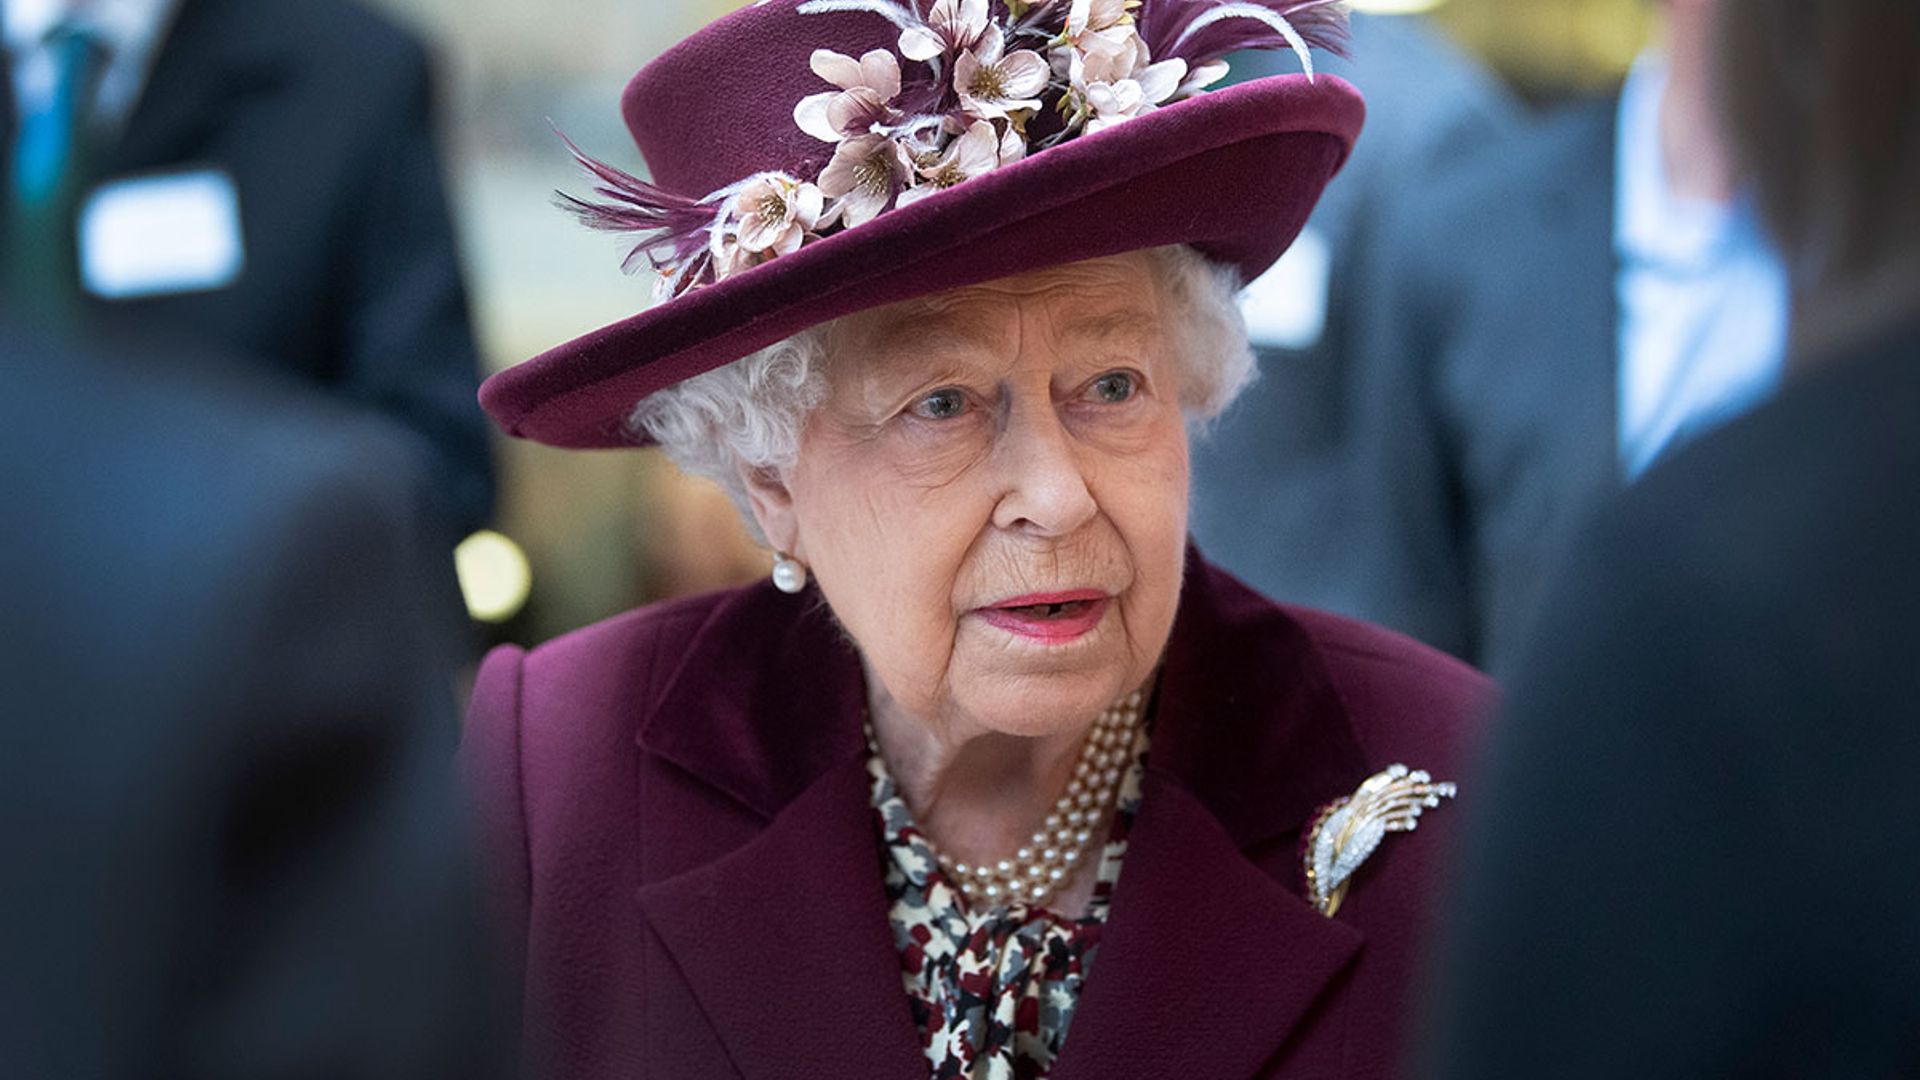 The Queen receives disappointing news from Royal Ascot 2021 - details ...